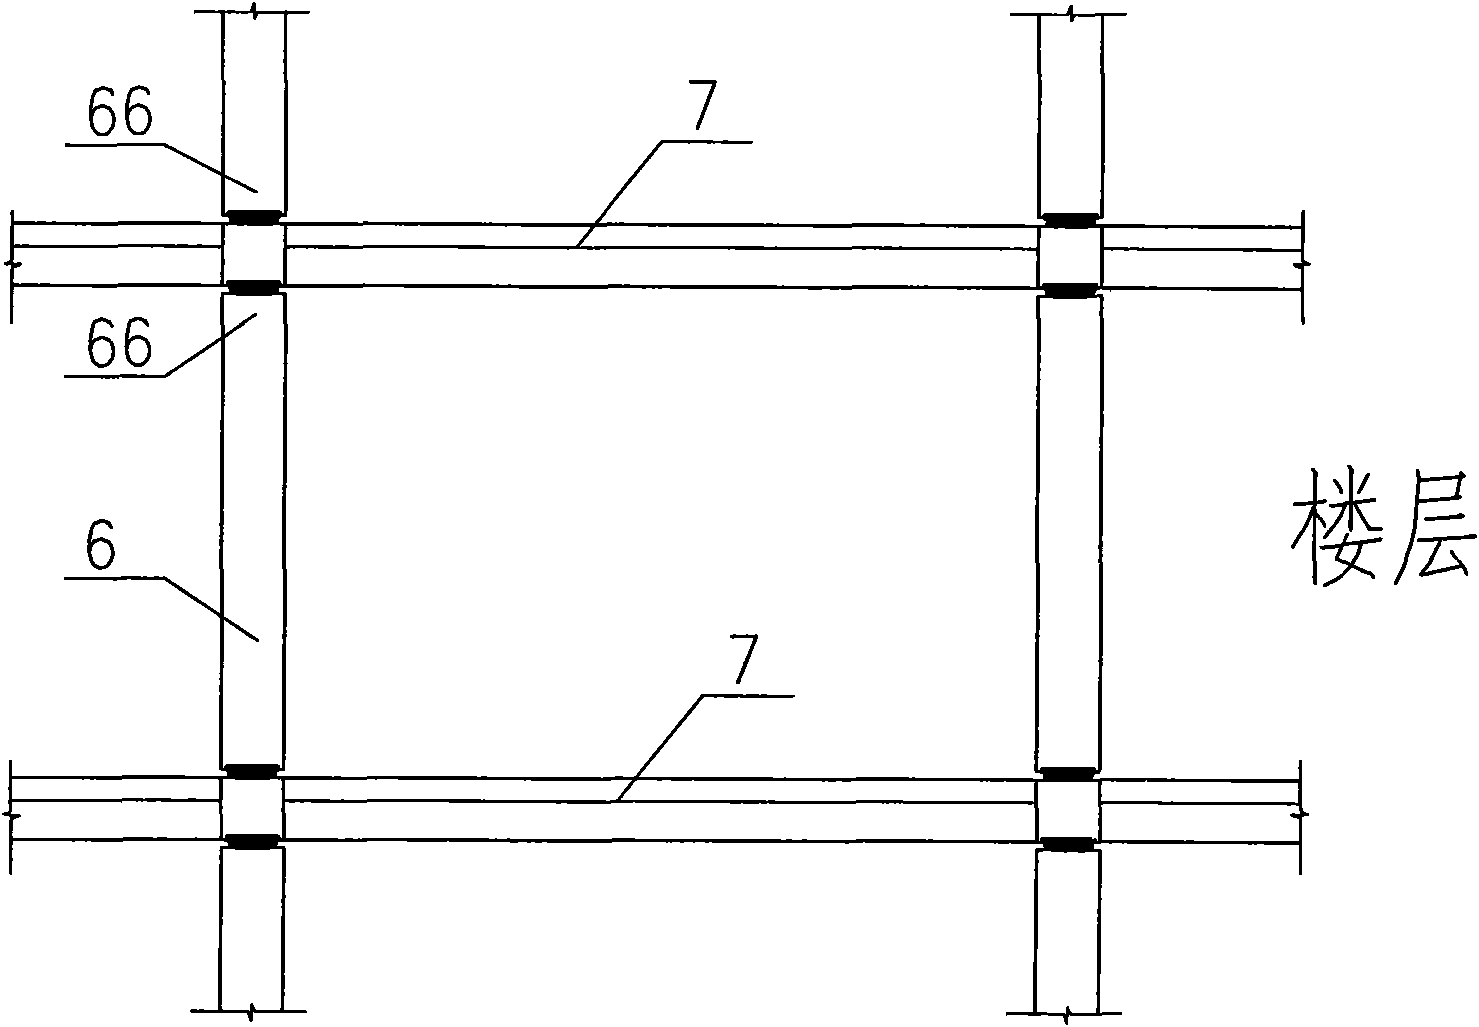 Node of connection of column and beam